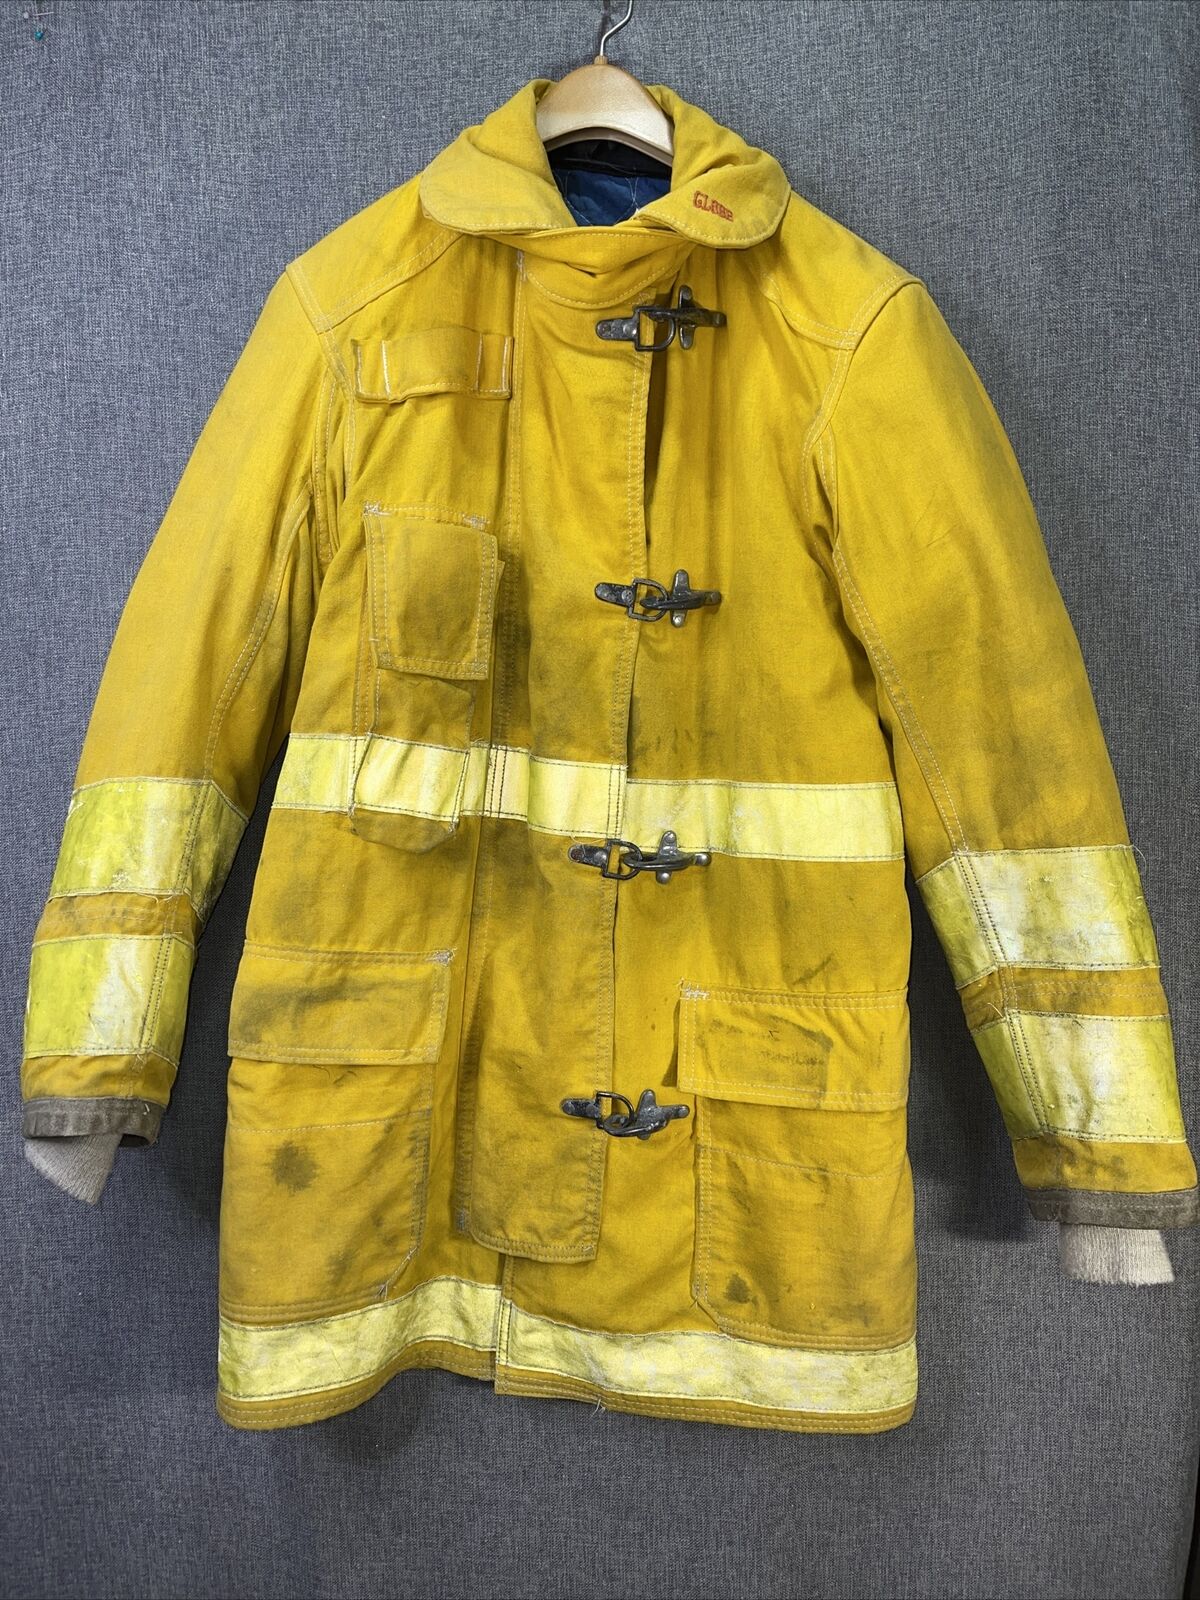 GLOBE VINTAGE FIREFIGHTER JACKET w/REMOVABLE LINING YELLOW TURNOUT COAT Size 36